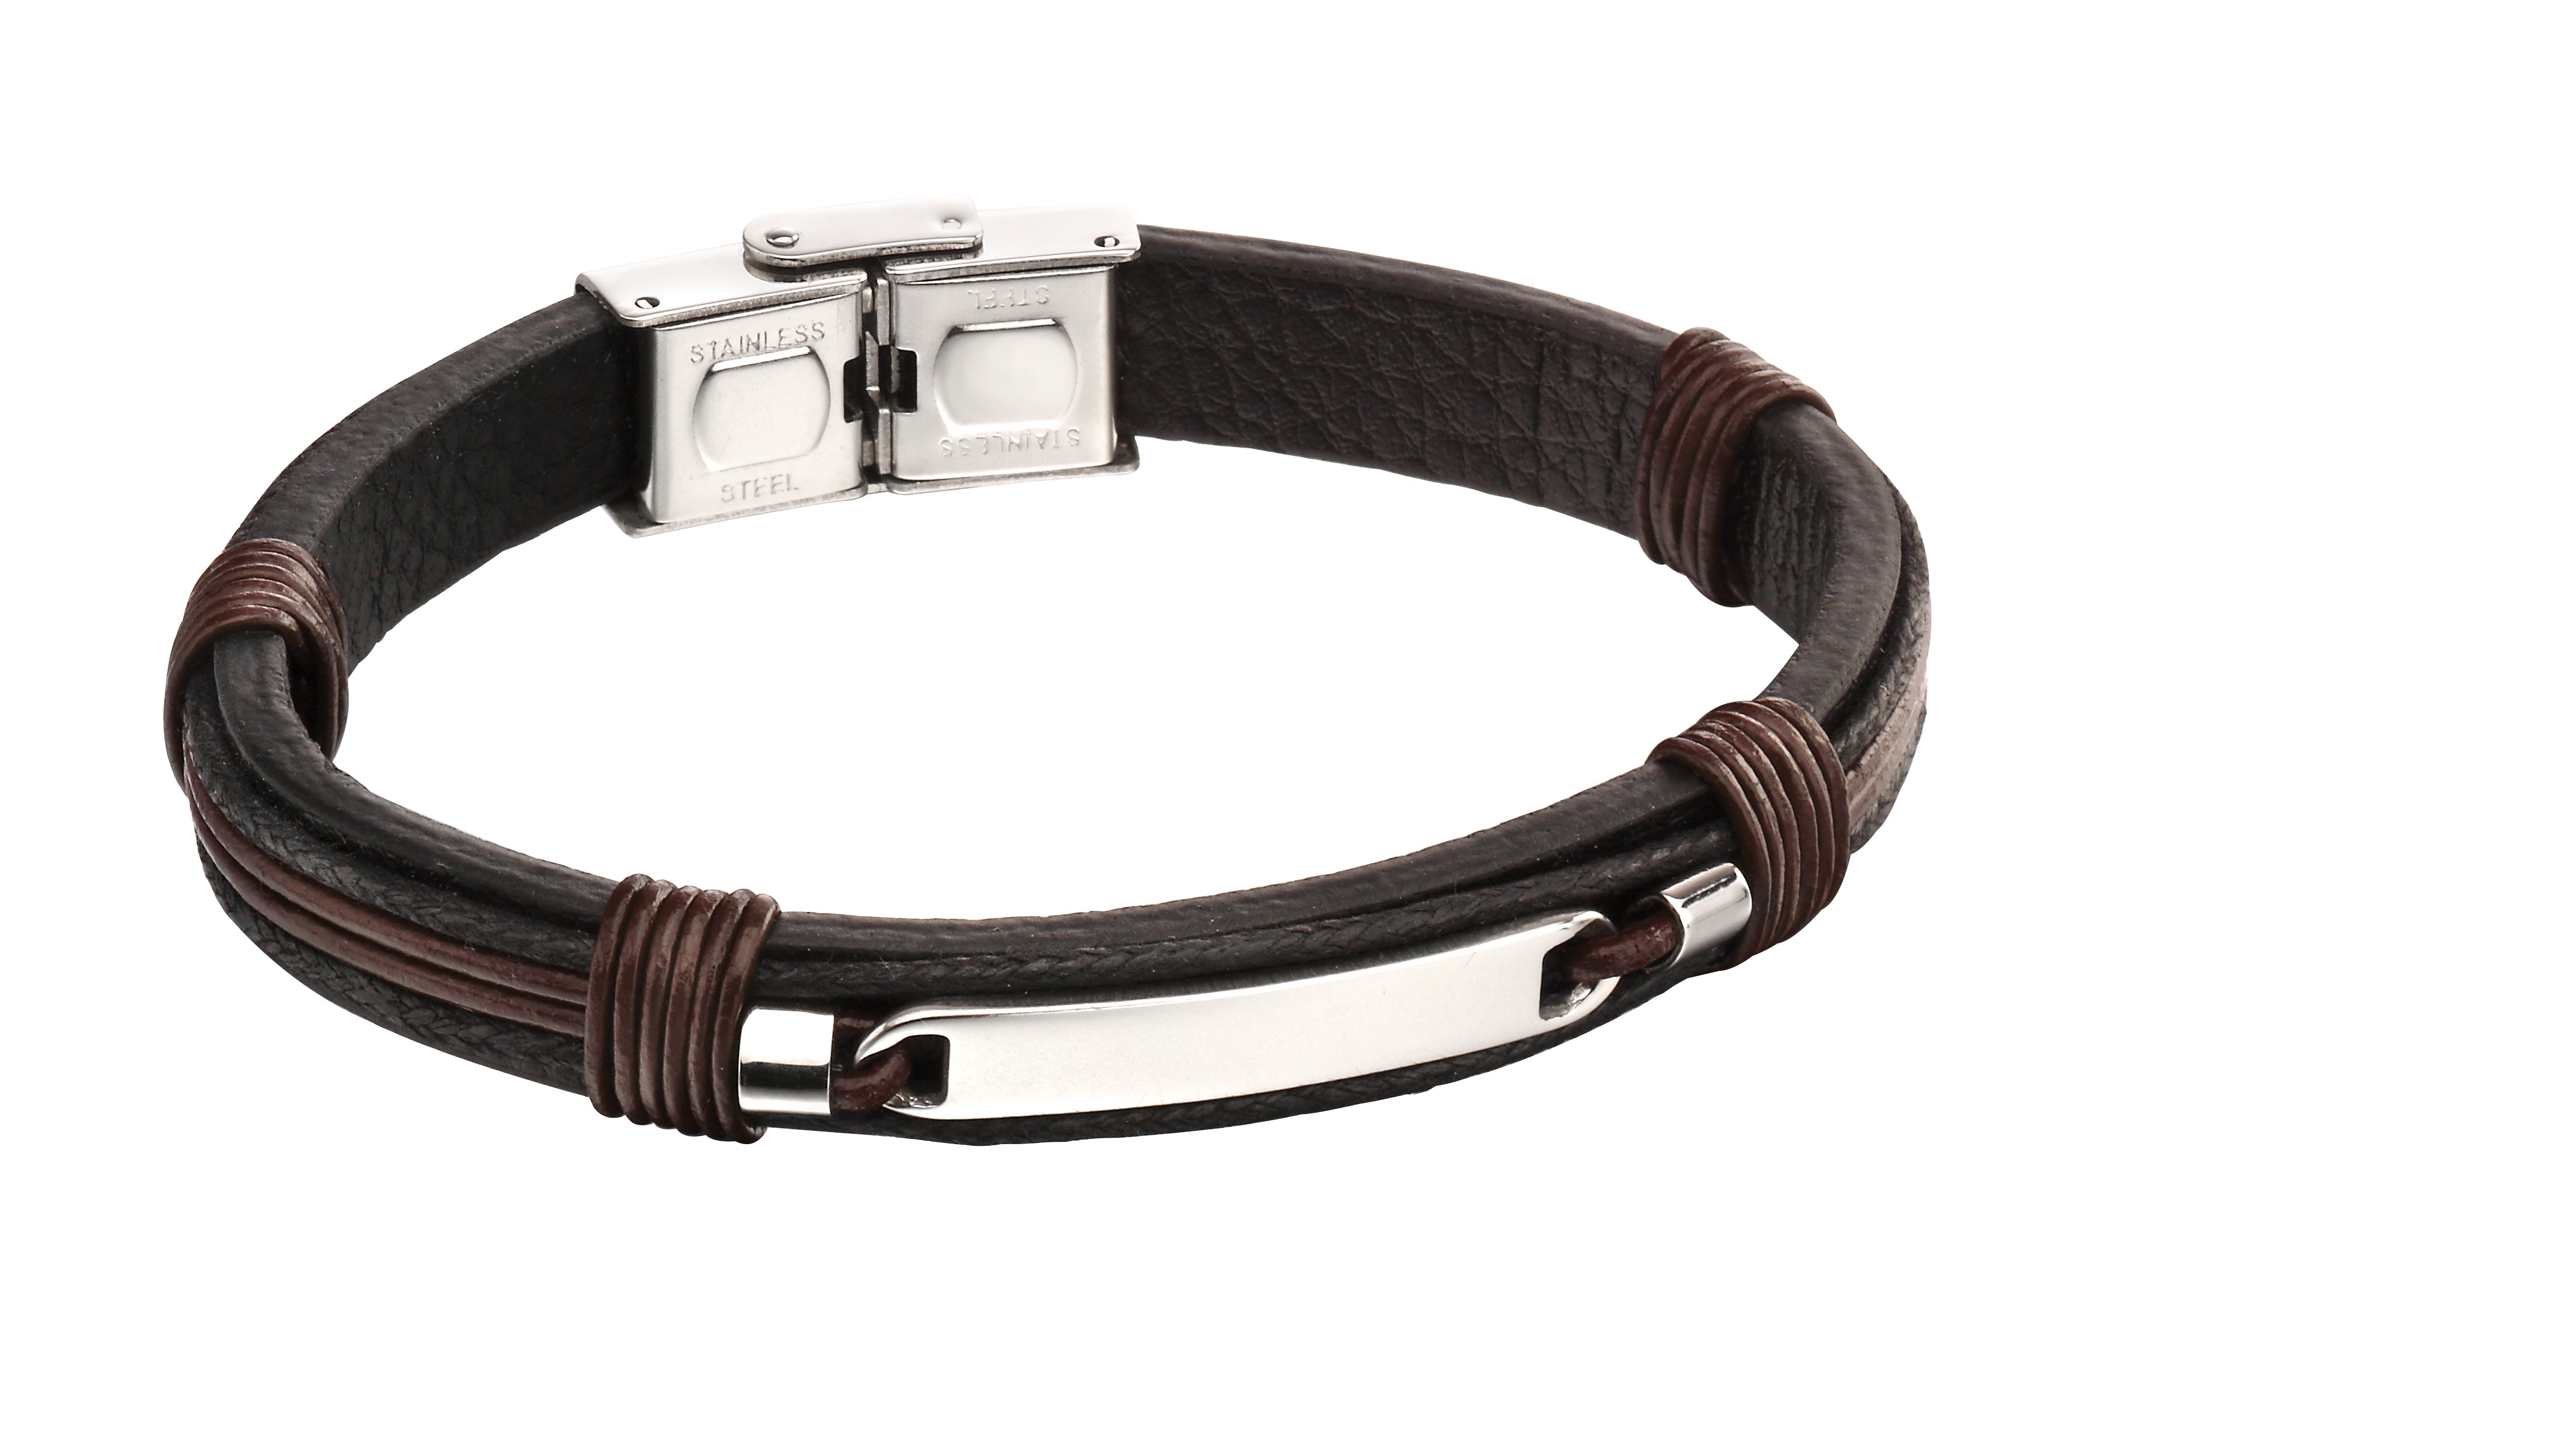 Stainless Steel & Brown Leather Engravable ID Bracelet - FB0006 - Hallmark Jewellers Formby & The Jewellers Bench Widnes